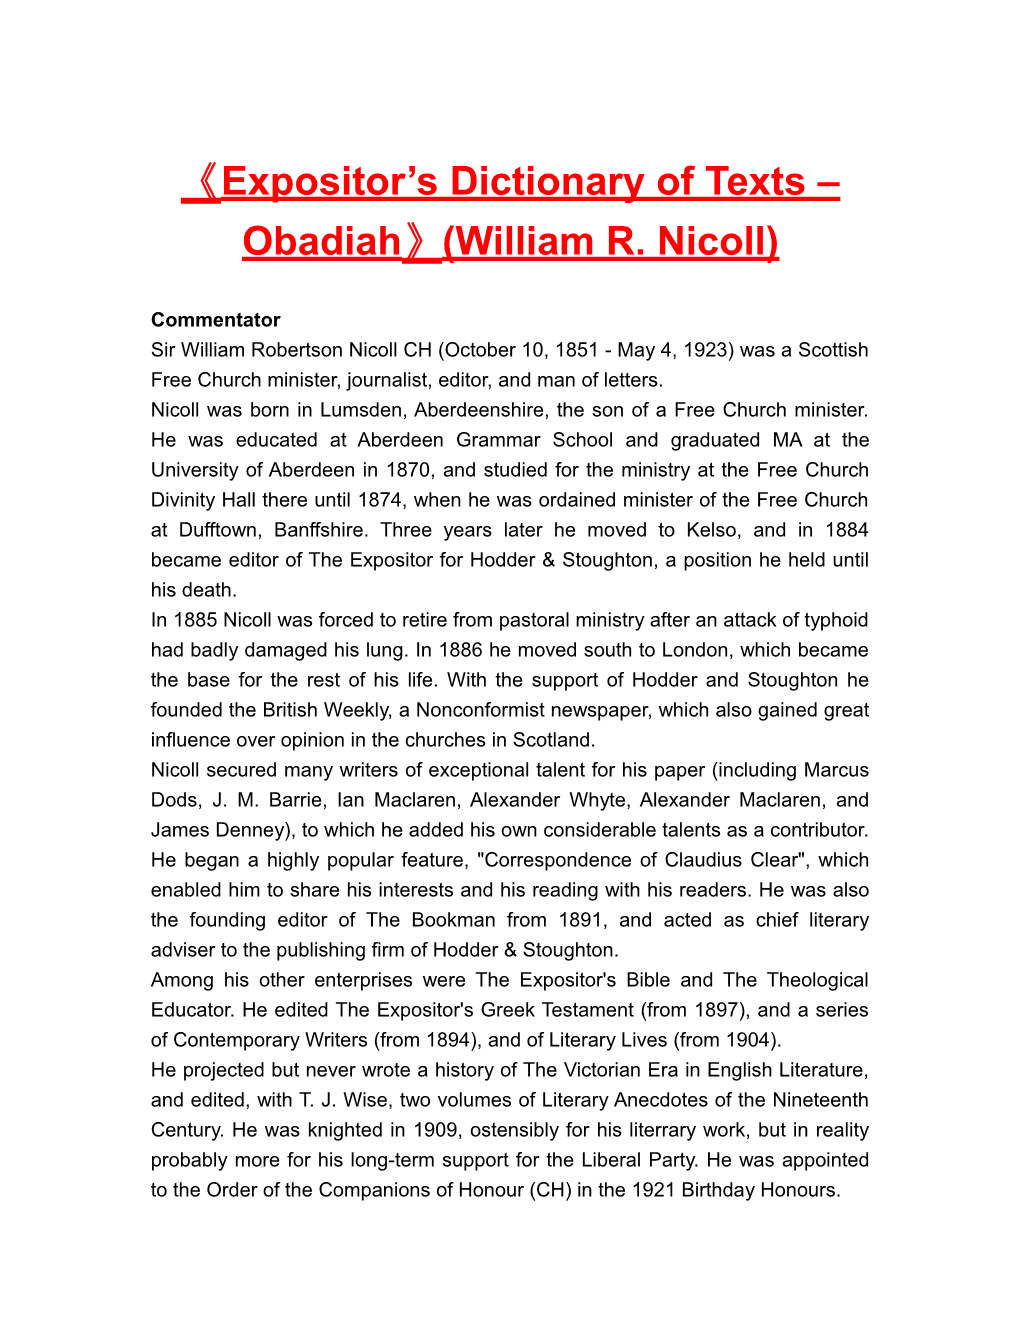 Expositor S Dictionary of Texts Obadiah (William R. Nicoll)